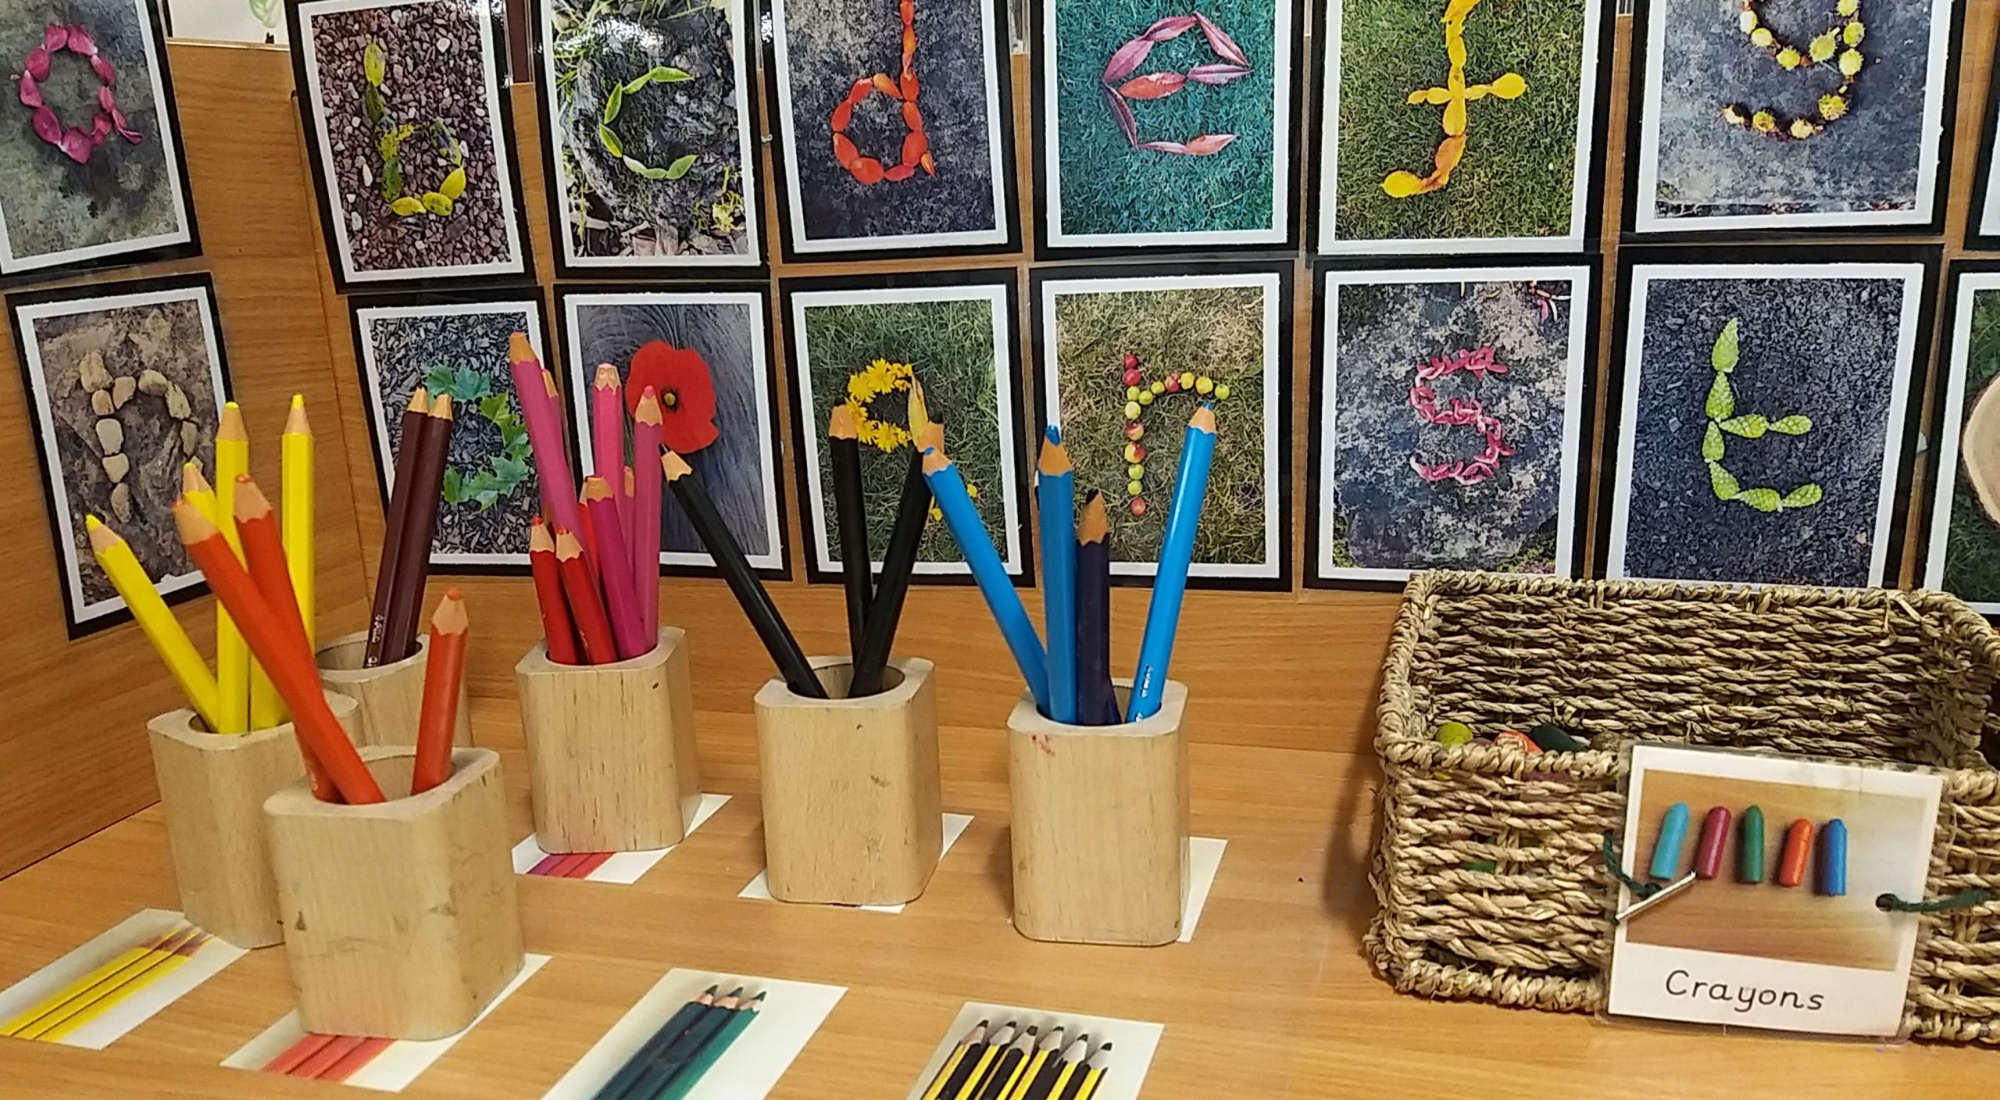 Pencils and crayons organised by colour in the Nursery mark making area